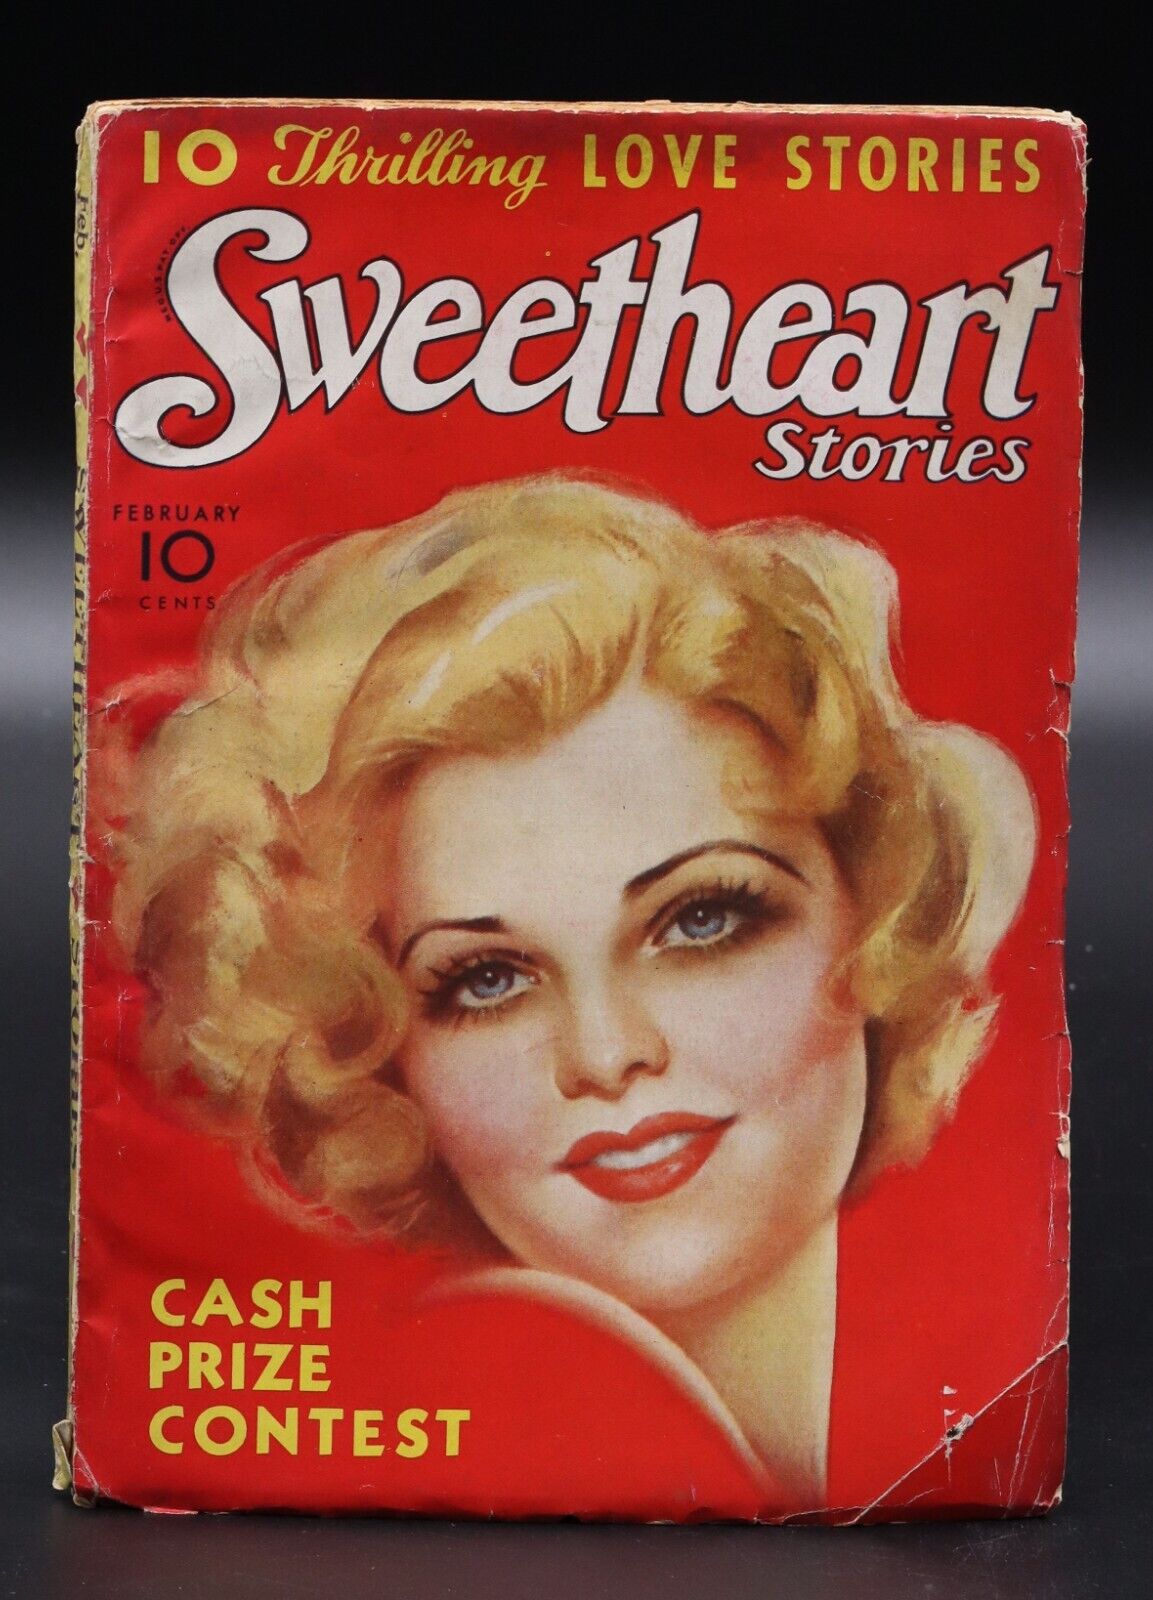 Sweetheart Stories (1925) Feb 1935 Rare Romance Pulp Airbush Painted Cover VG+